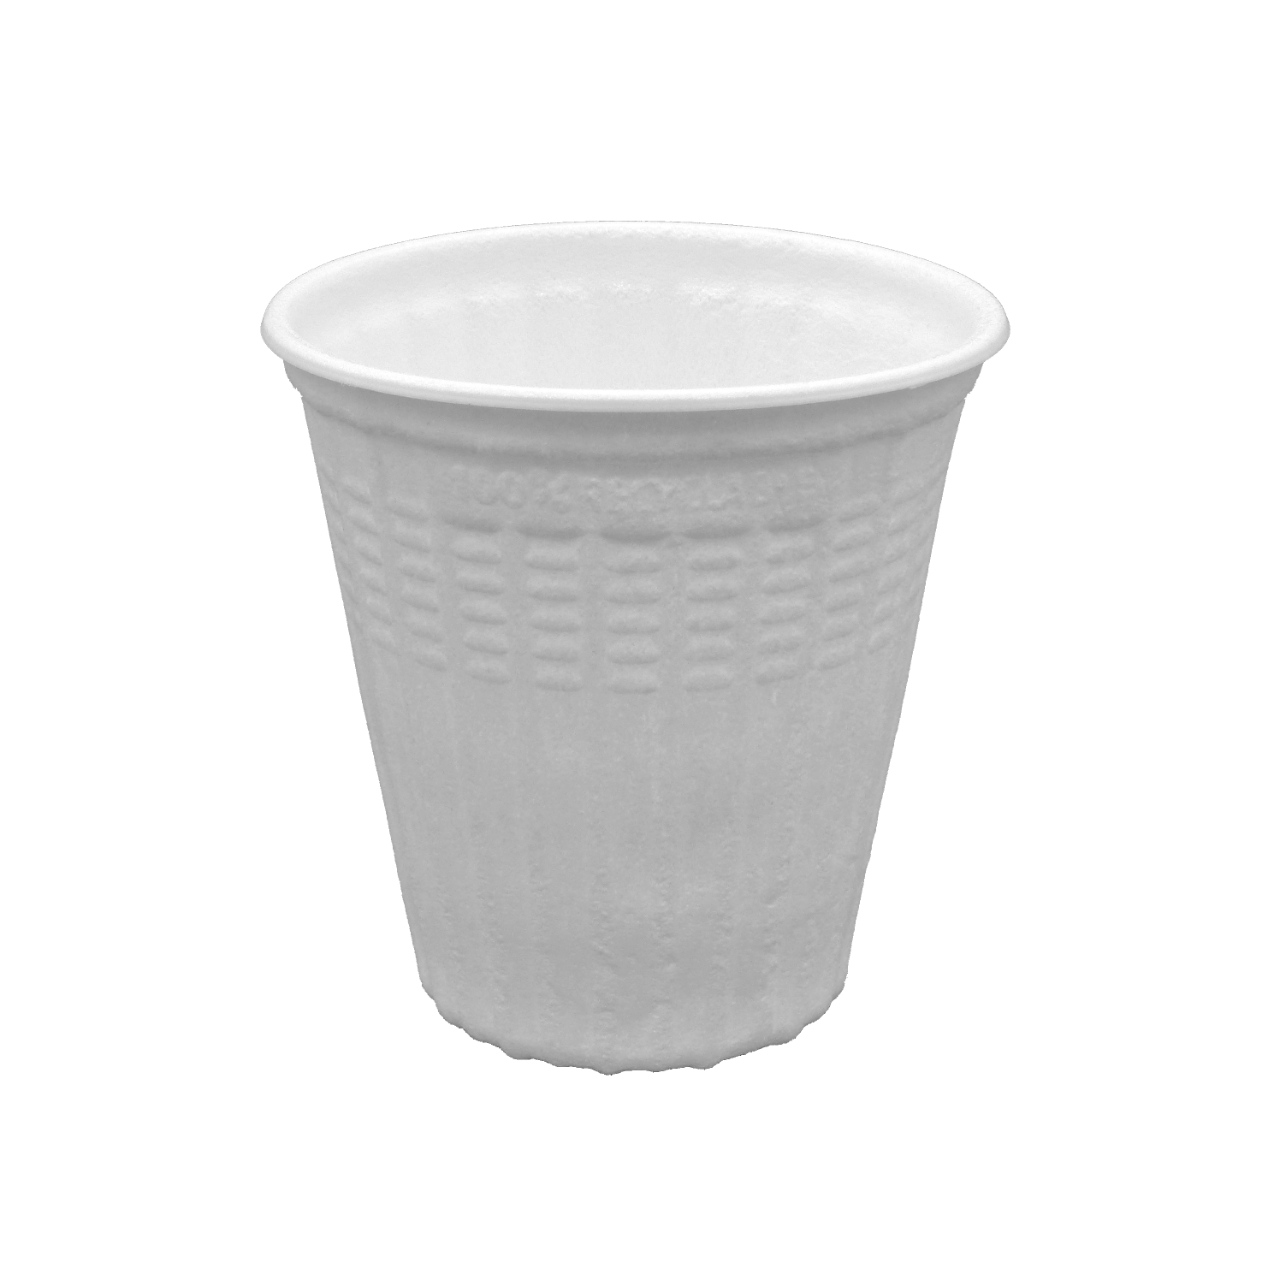 Suppen-Foodcontainer 750 ml, PP-weiß, Thermo